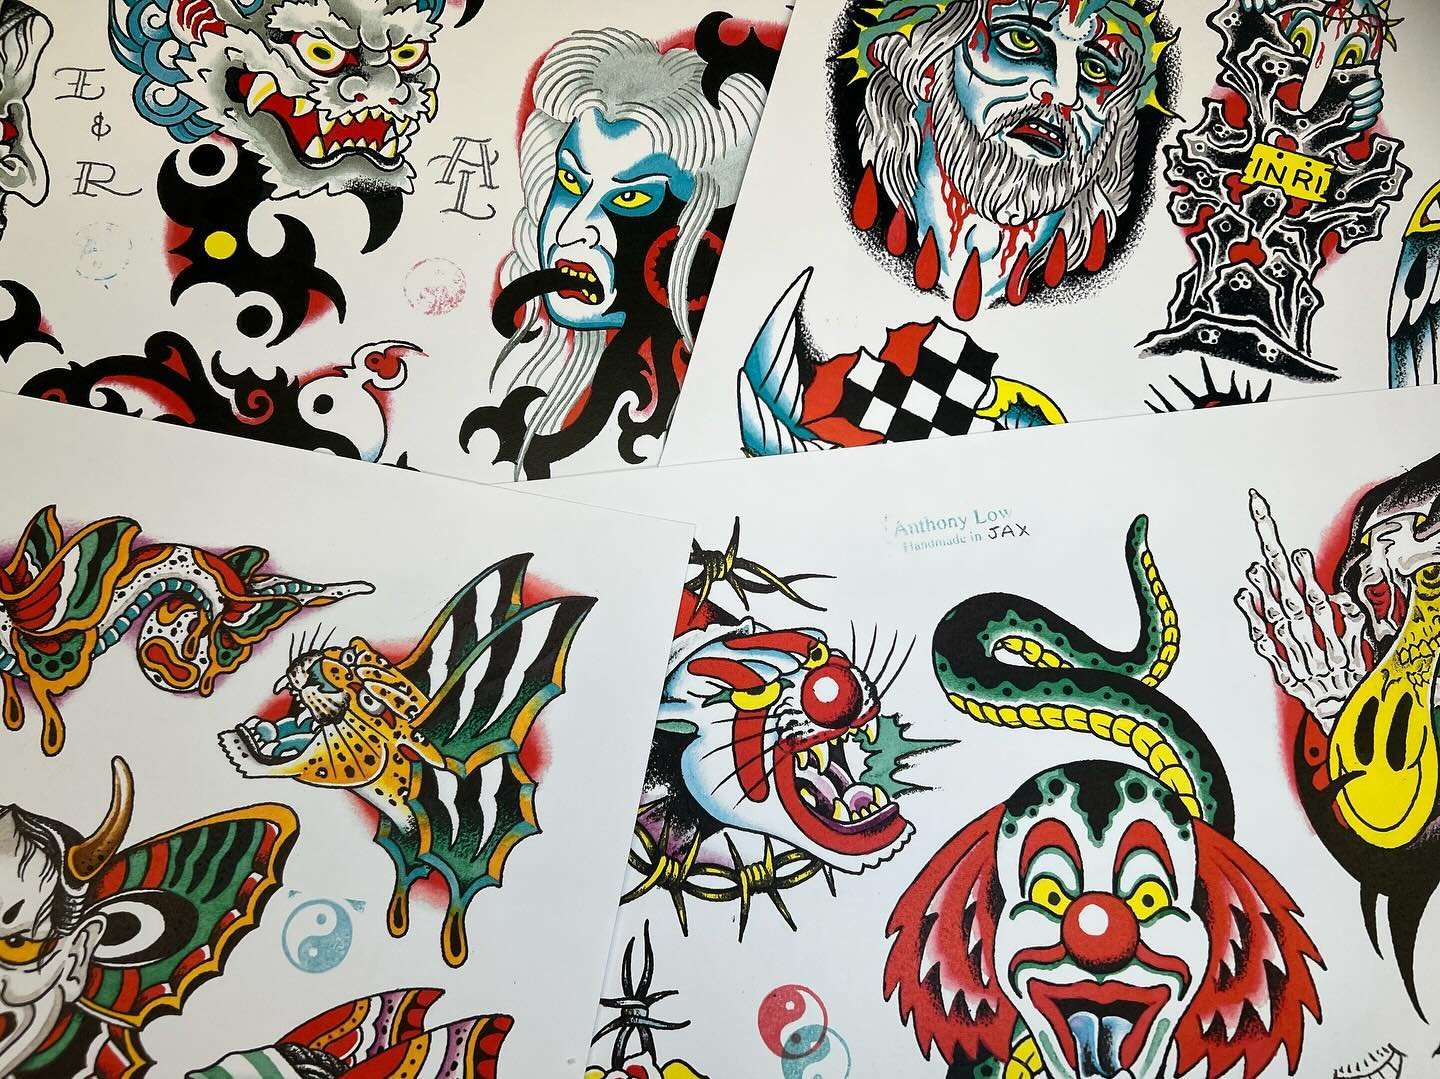 4/20 @ noon! I&rsquo;ll be posting a flash set up for sale on my webstore. 10 sheets, with line drawings and some assorted extras. 60+ designs from (kind of) mild to wild printed on 80lb card stock. Nothing too fancy, just fun tats to make you some l